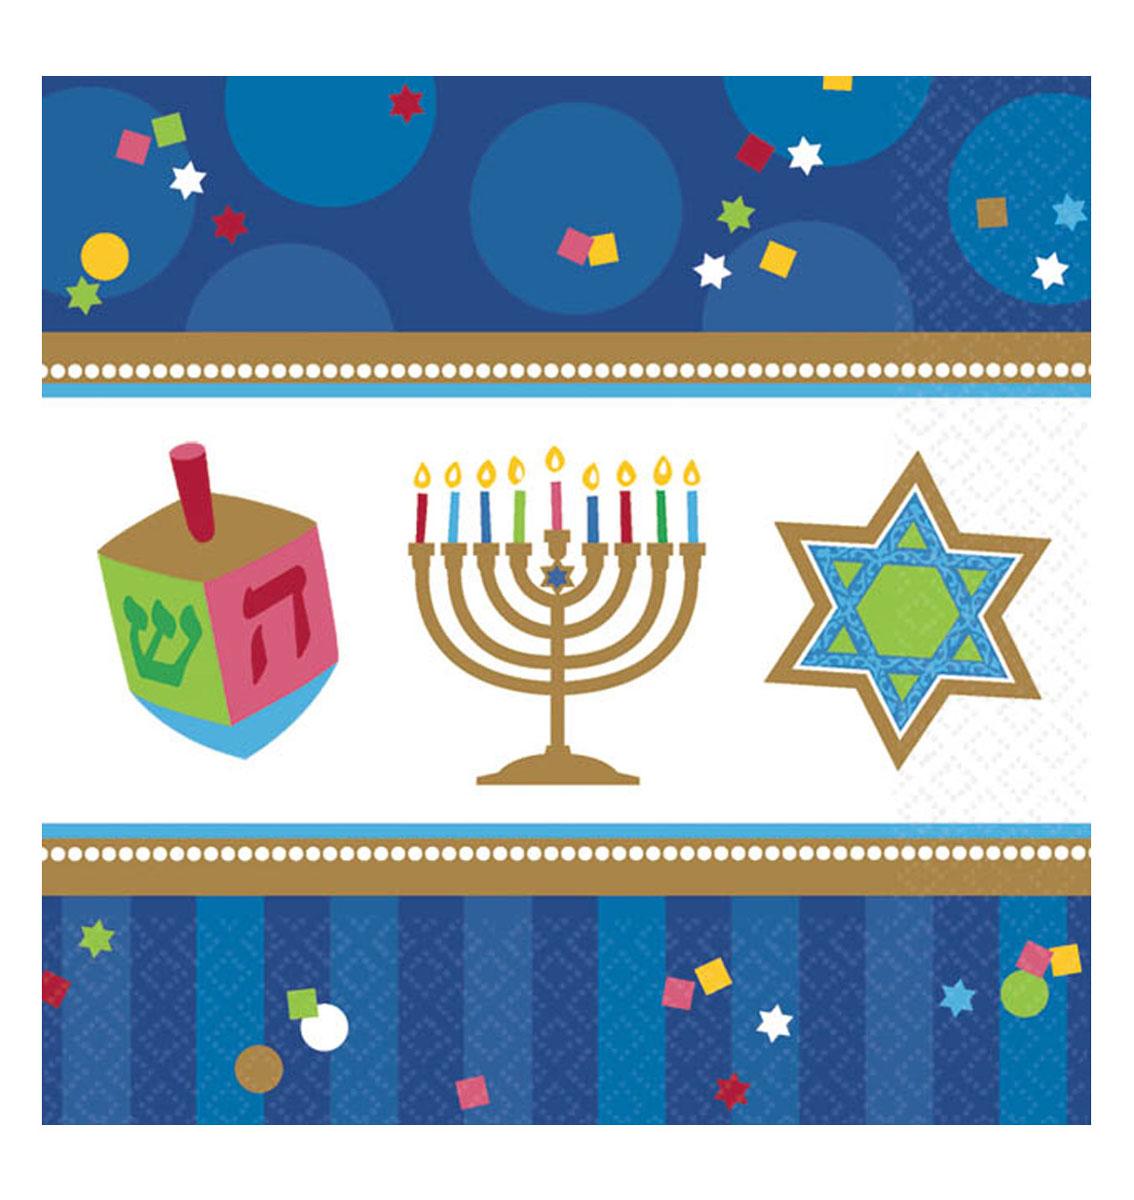 Hanukkah Celebrations Beverage Napkins 25cm - pk36 by Amscan 703803 available here at Karnival Cosumes online party shop